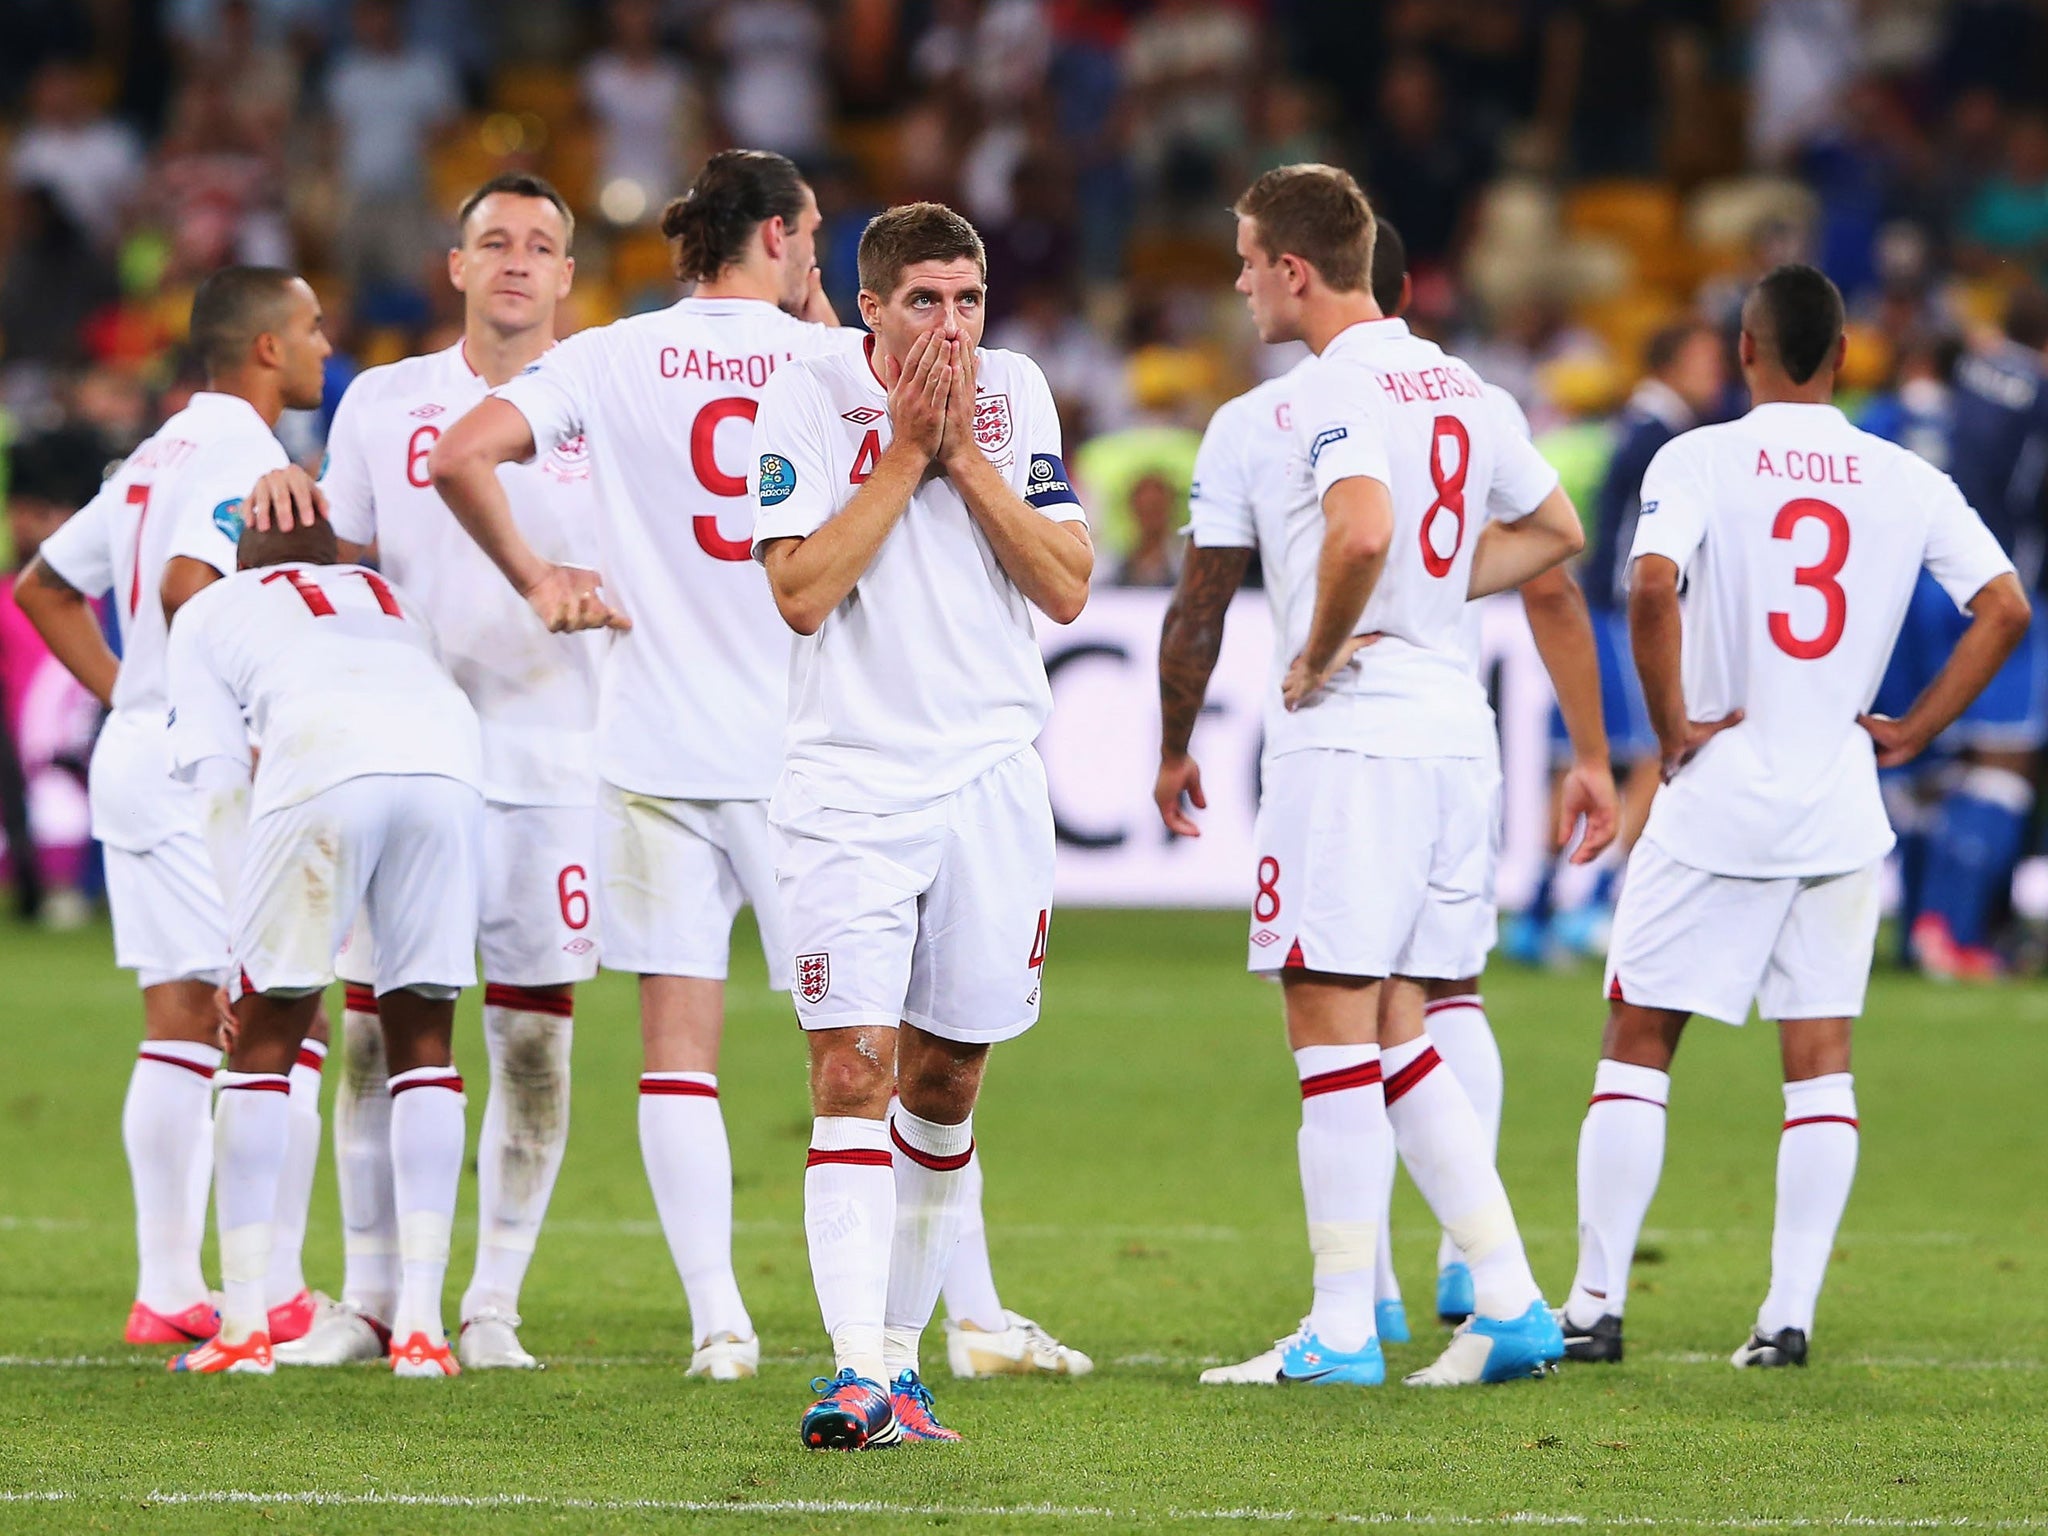 June 24 2012: England lose the penalty shoot out during the EURO 2012 quarter final match against Italy in Kiev